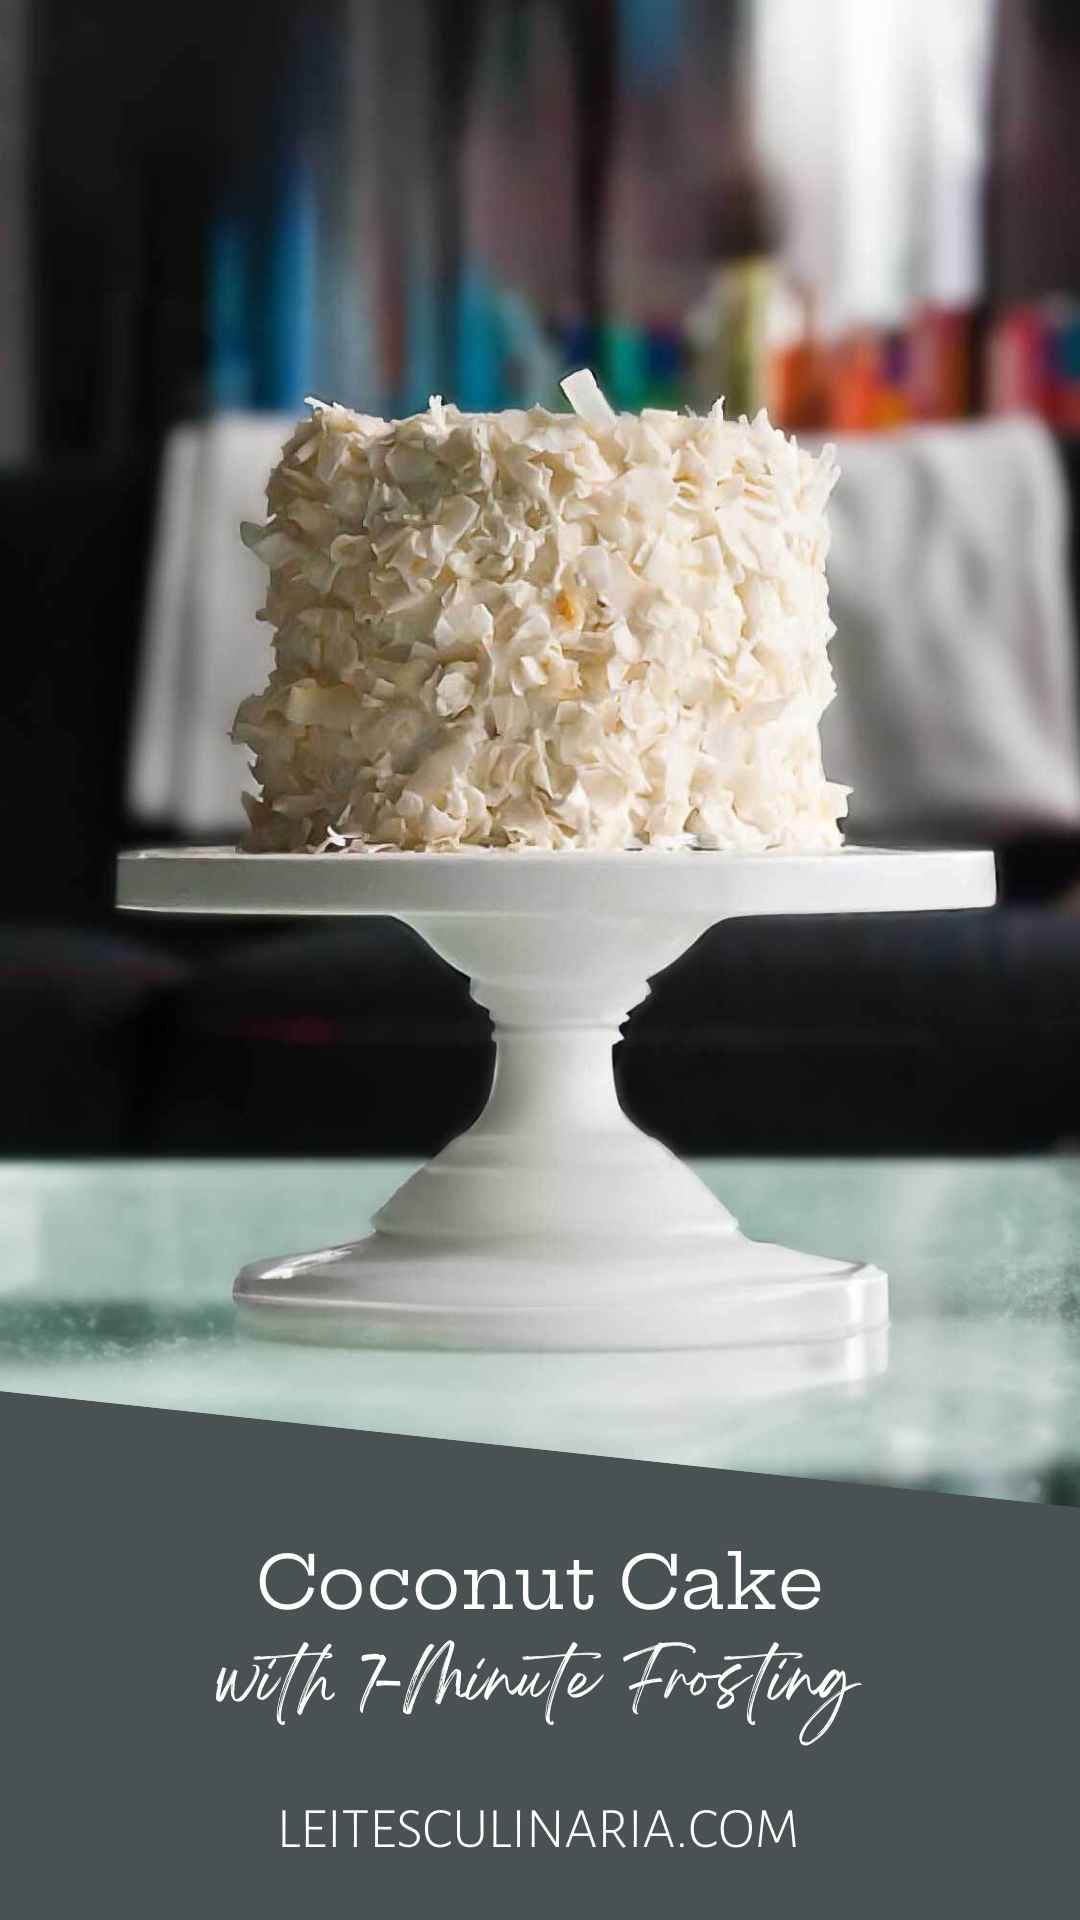 A coconut cake covered in flakes of coconut on a white cake stand.